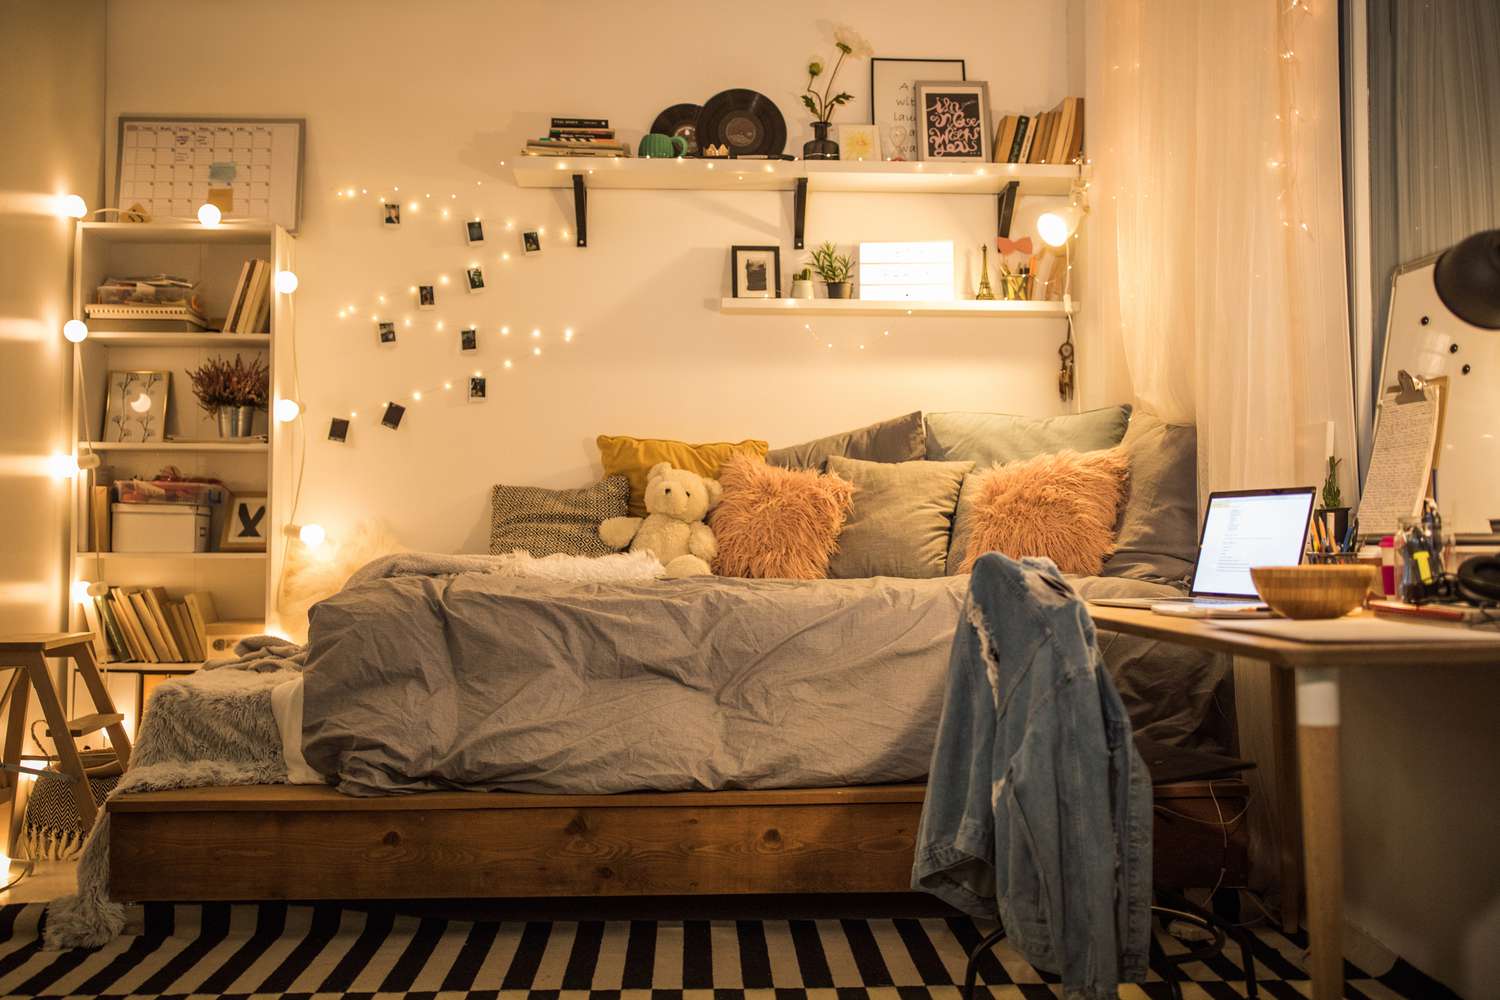 What Are Good Things To Have In A Dorm Room? 5 Top Tips To Make You Feel Right At Home